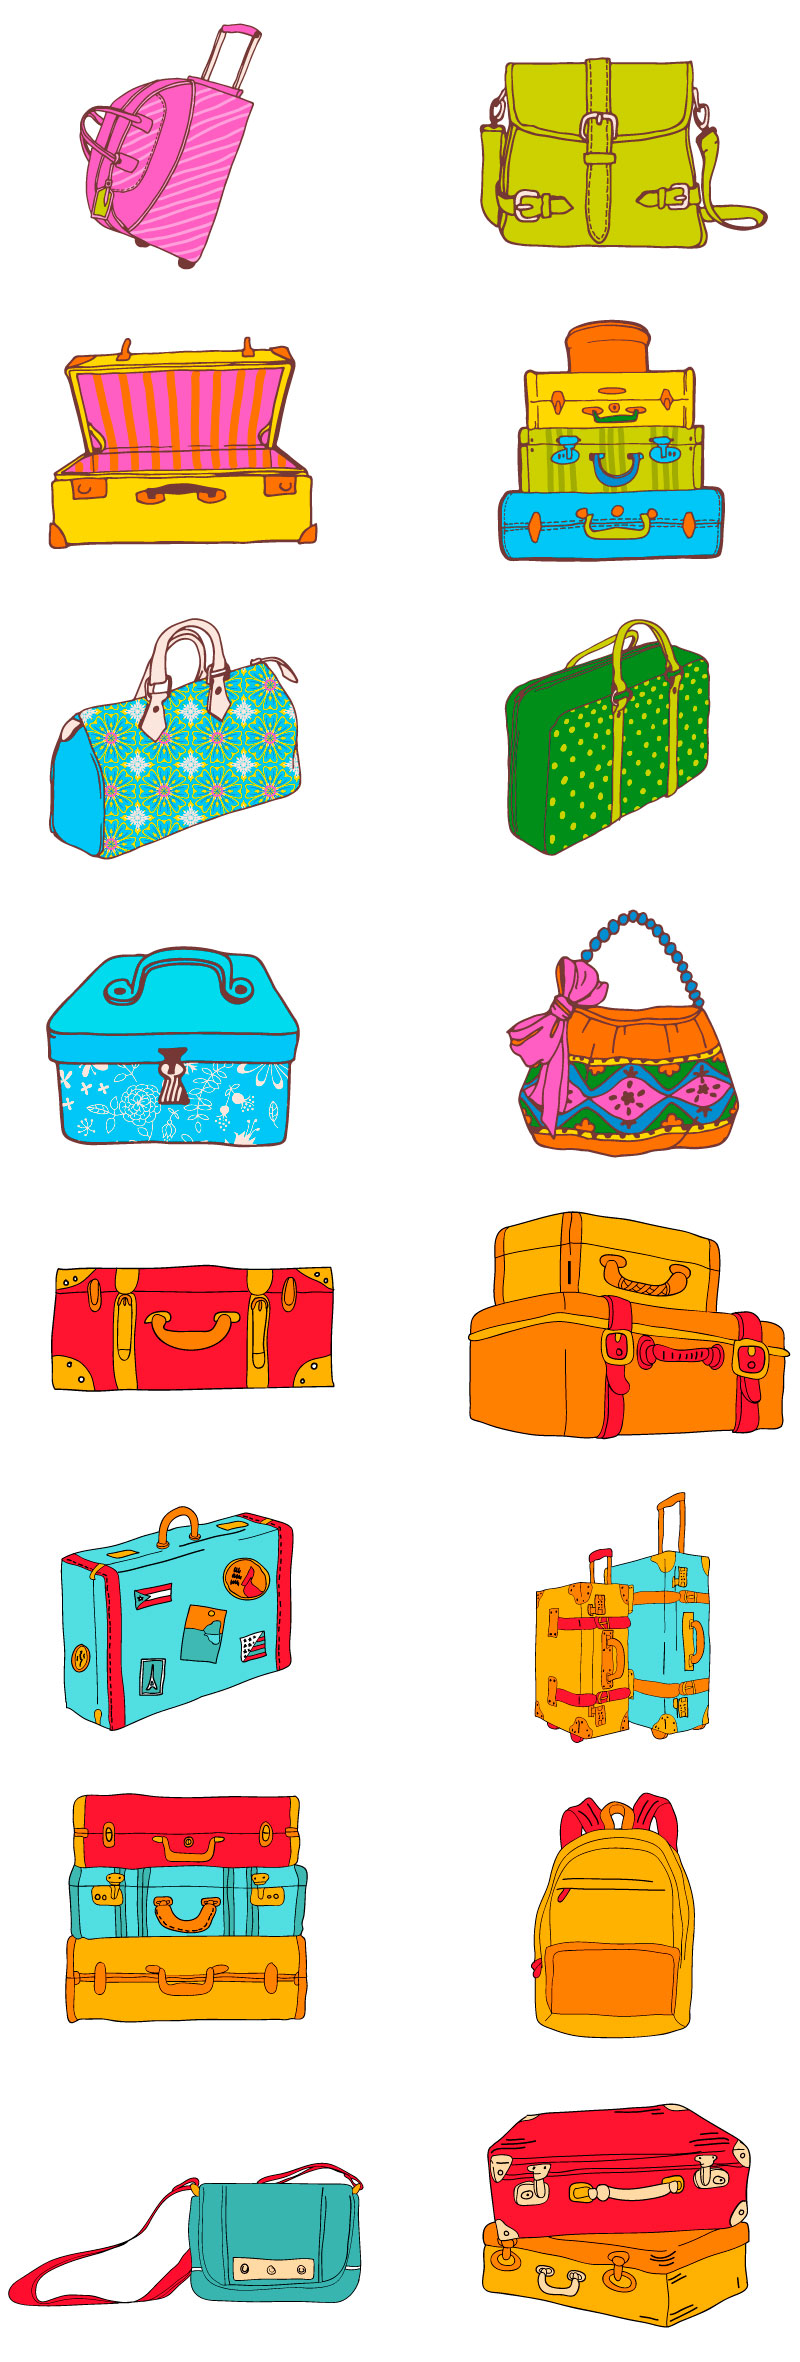 Colourful Hand Drawn Traveling Suitcase AI Vector